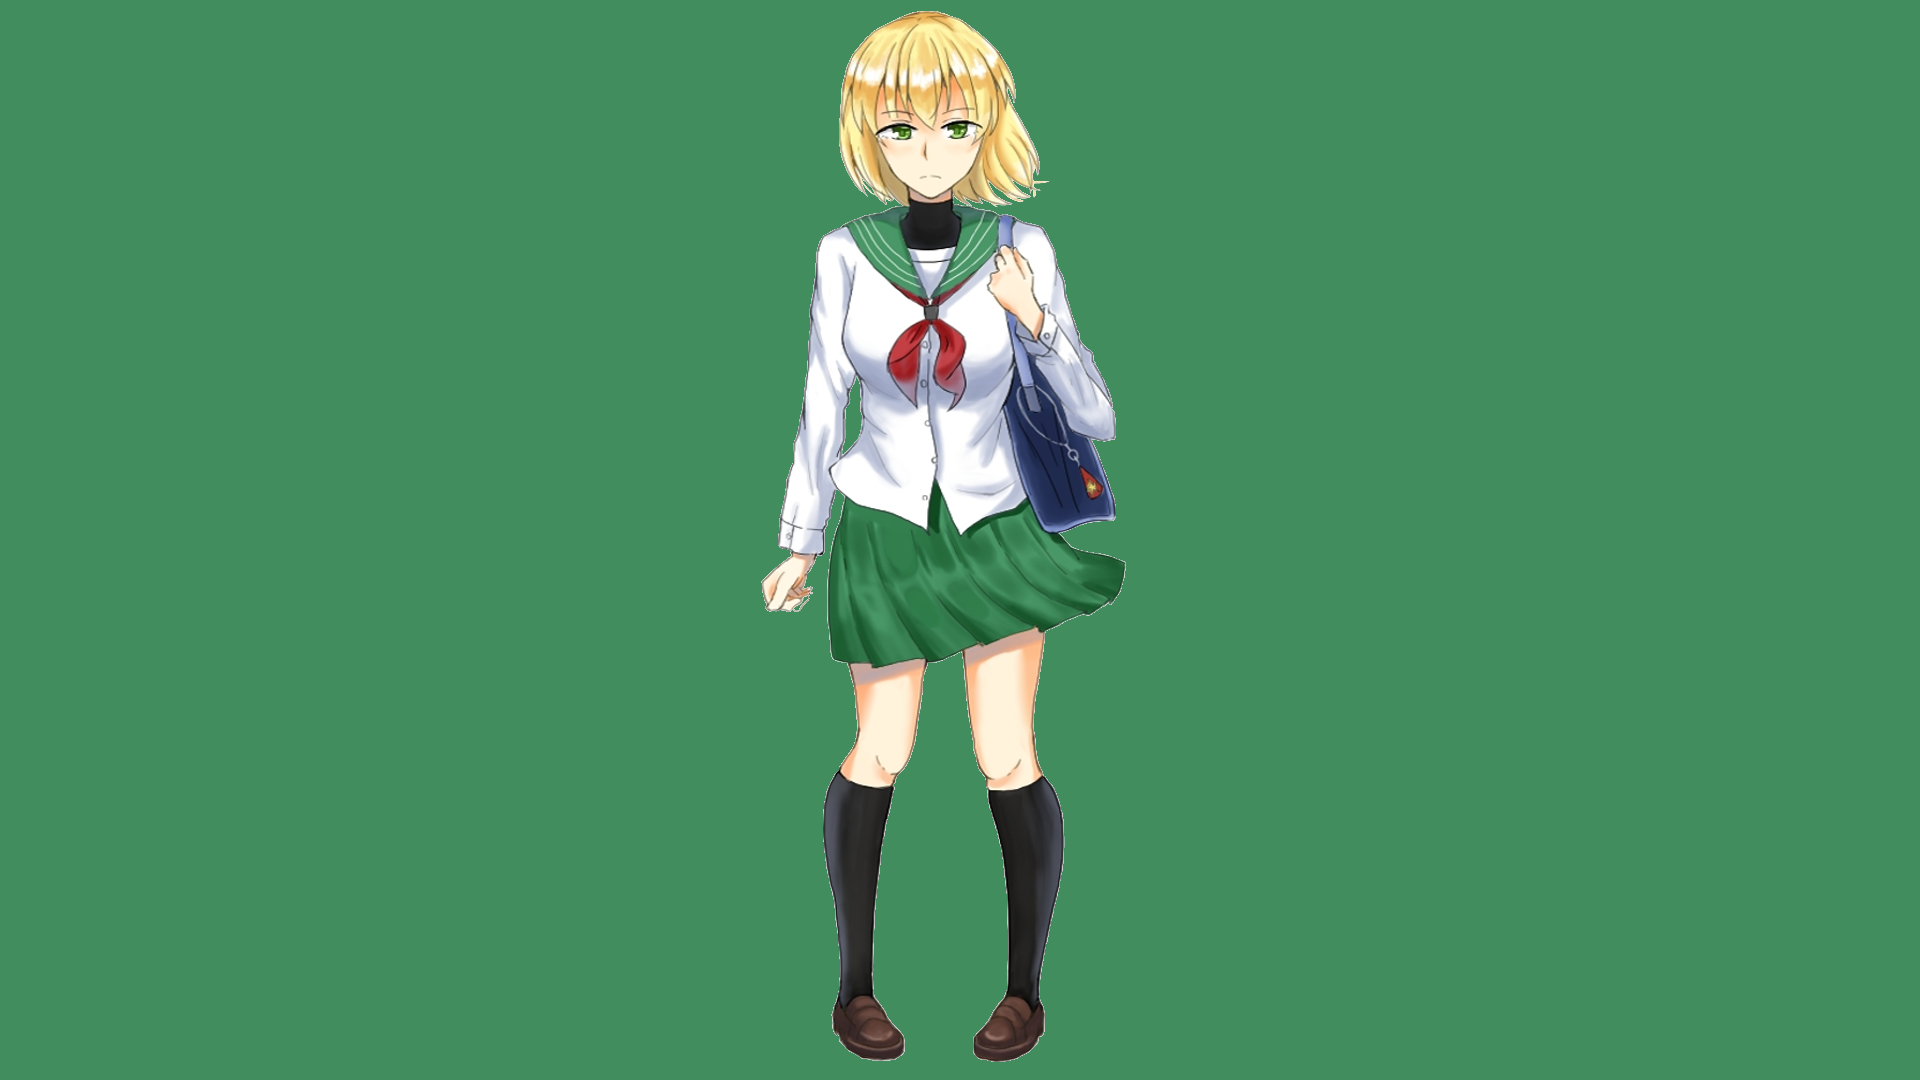 Parsee Mizuhashi by サイトー